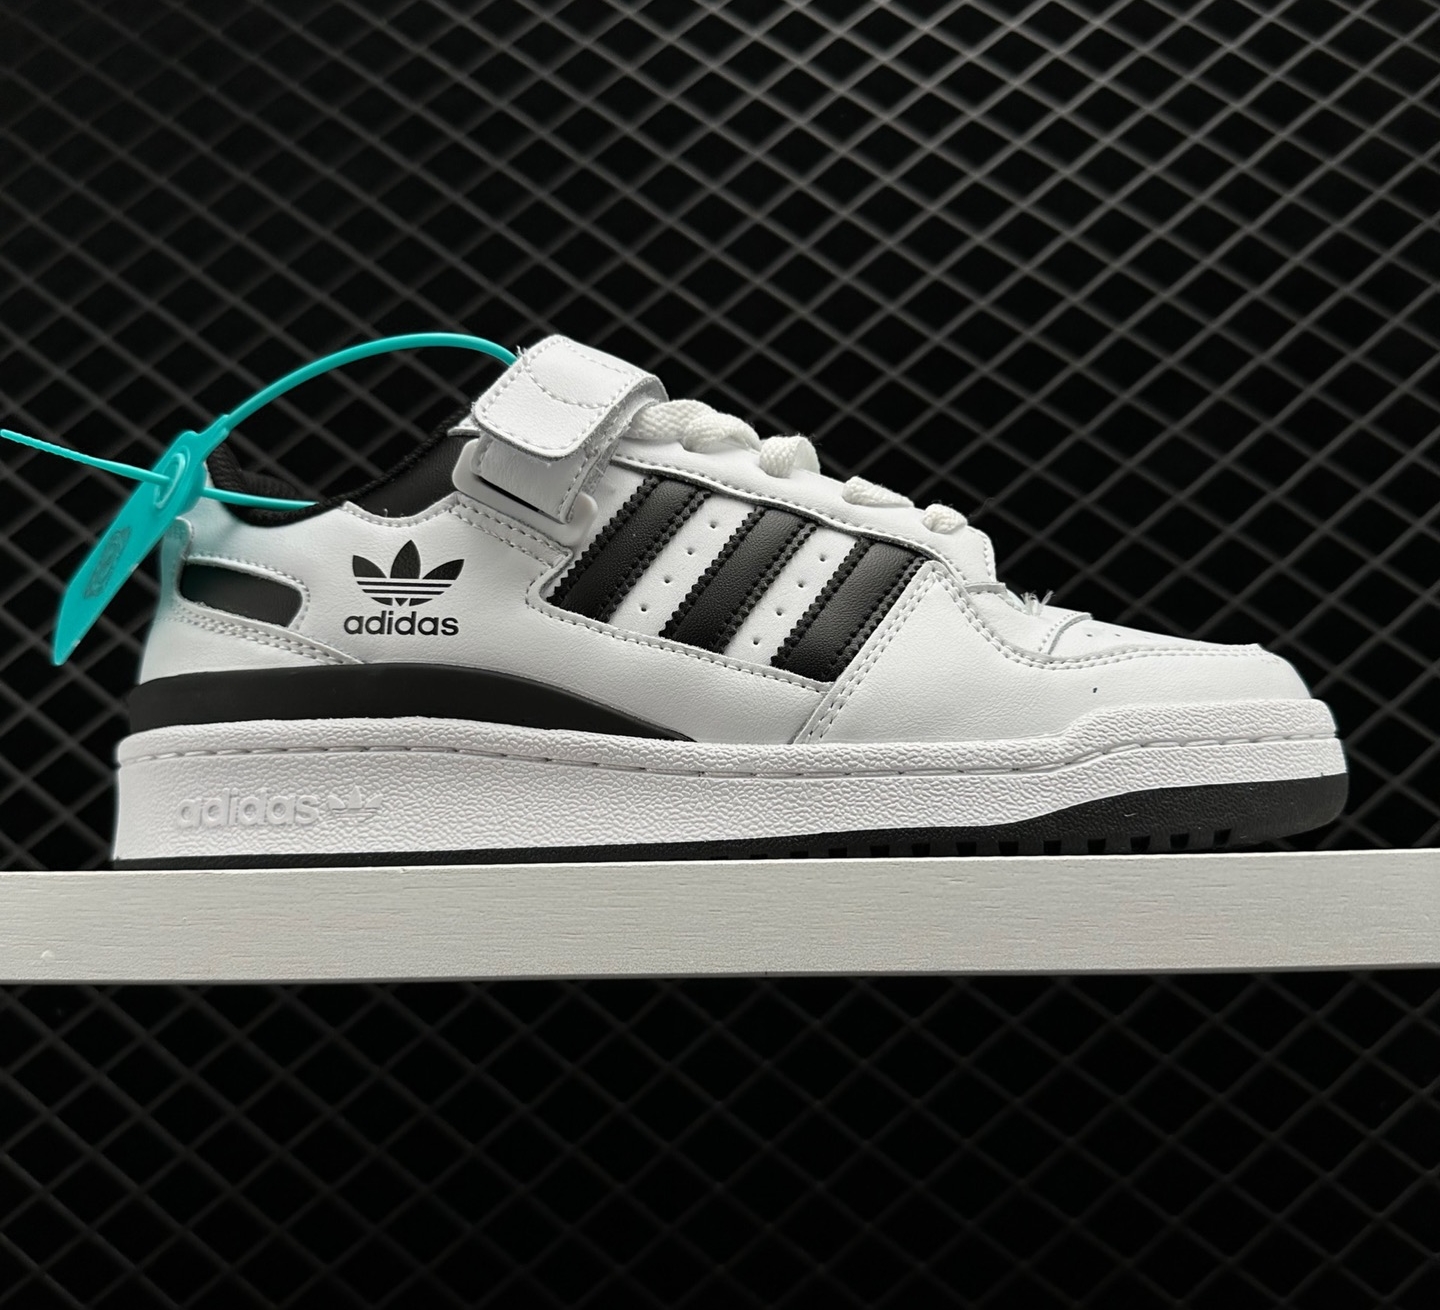 Adidas Forum Low 'White Black' FY7757 - Classic Sneaker Style with Modern Appeal